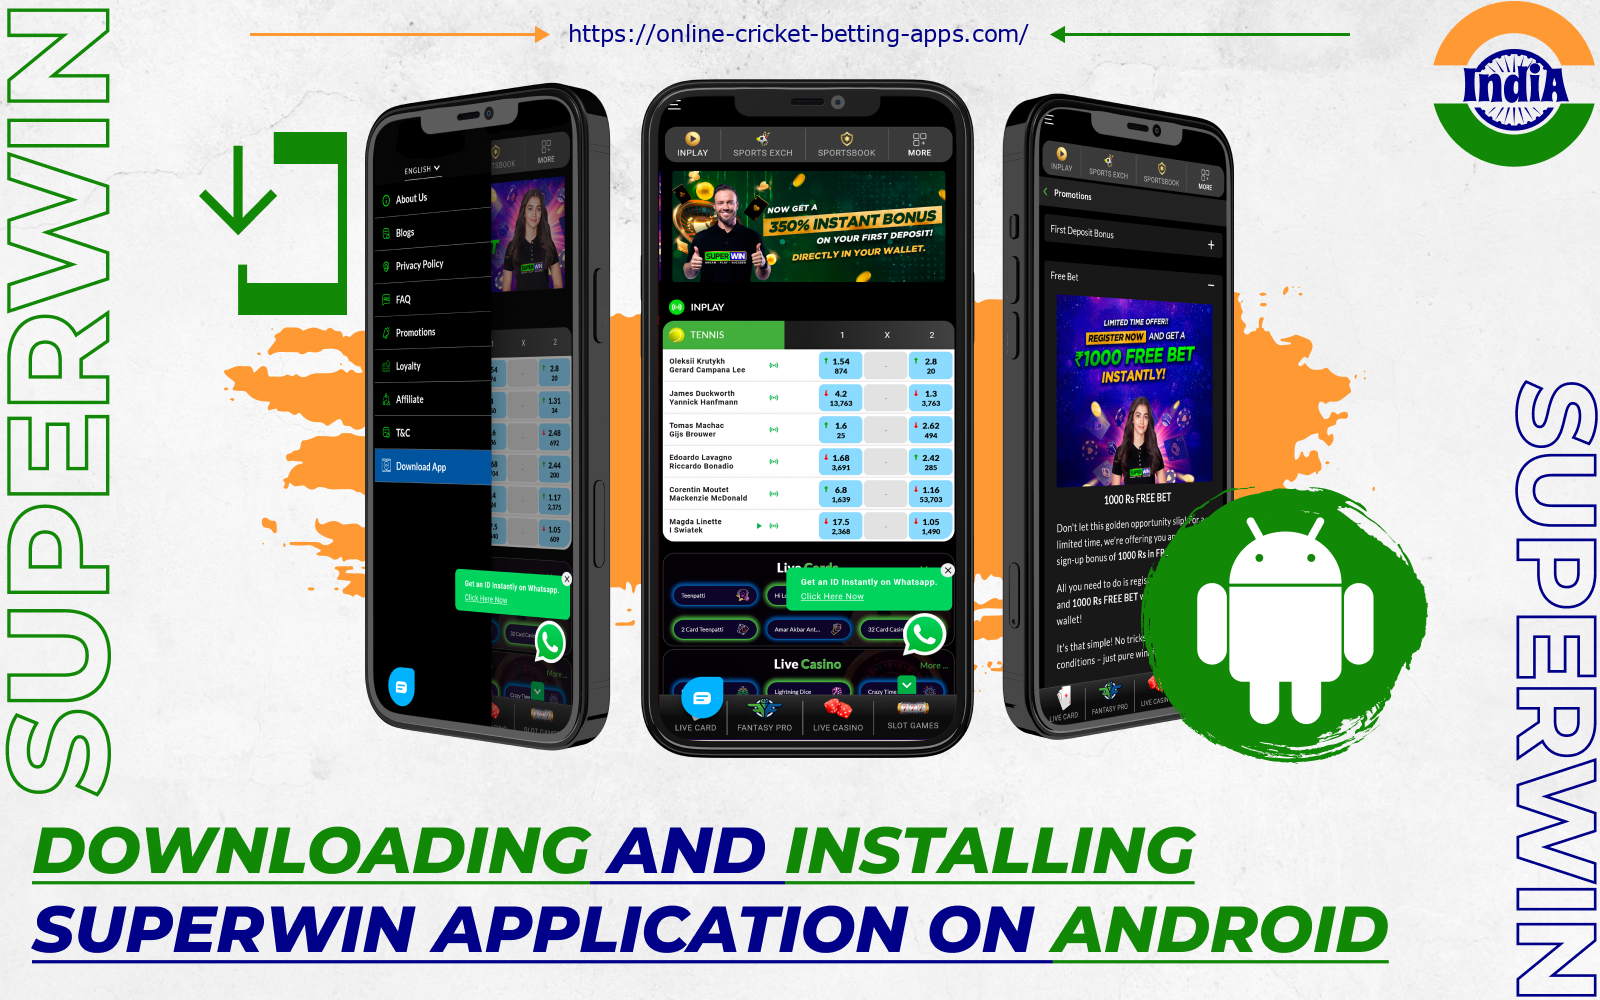 Indian punters can download the SuperWin app for Android exclusively from the bookmaker's website and start betting at any time